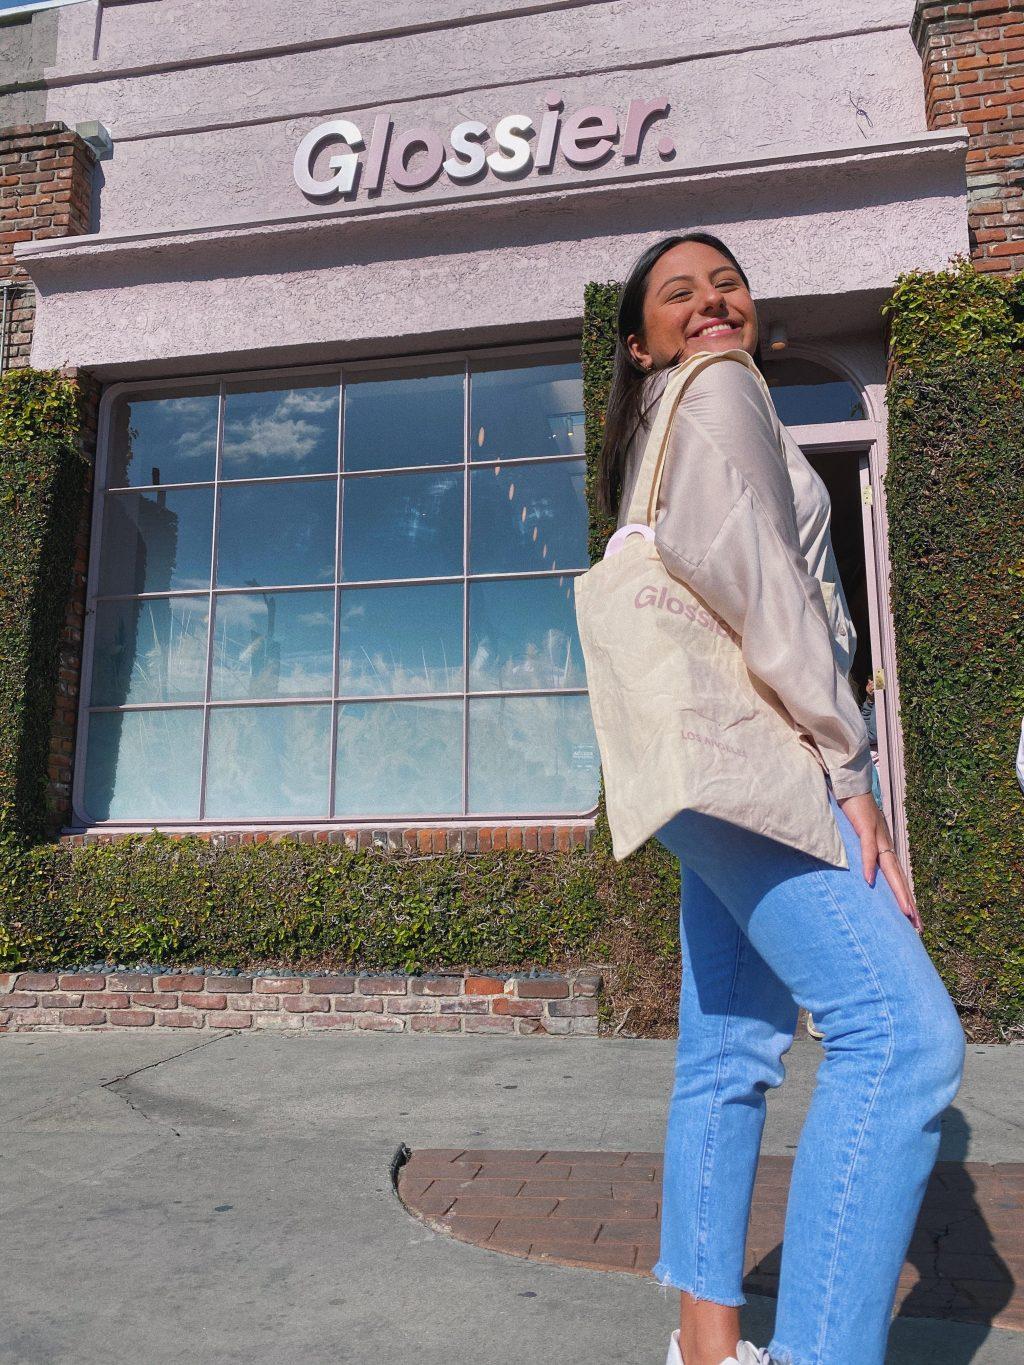 Hurtado pops a knee outside of the Glossier store on Melrose Place, a neighborhood in L.A.